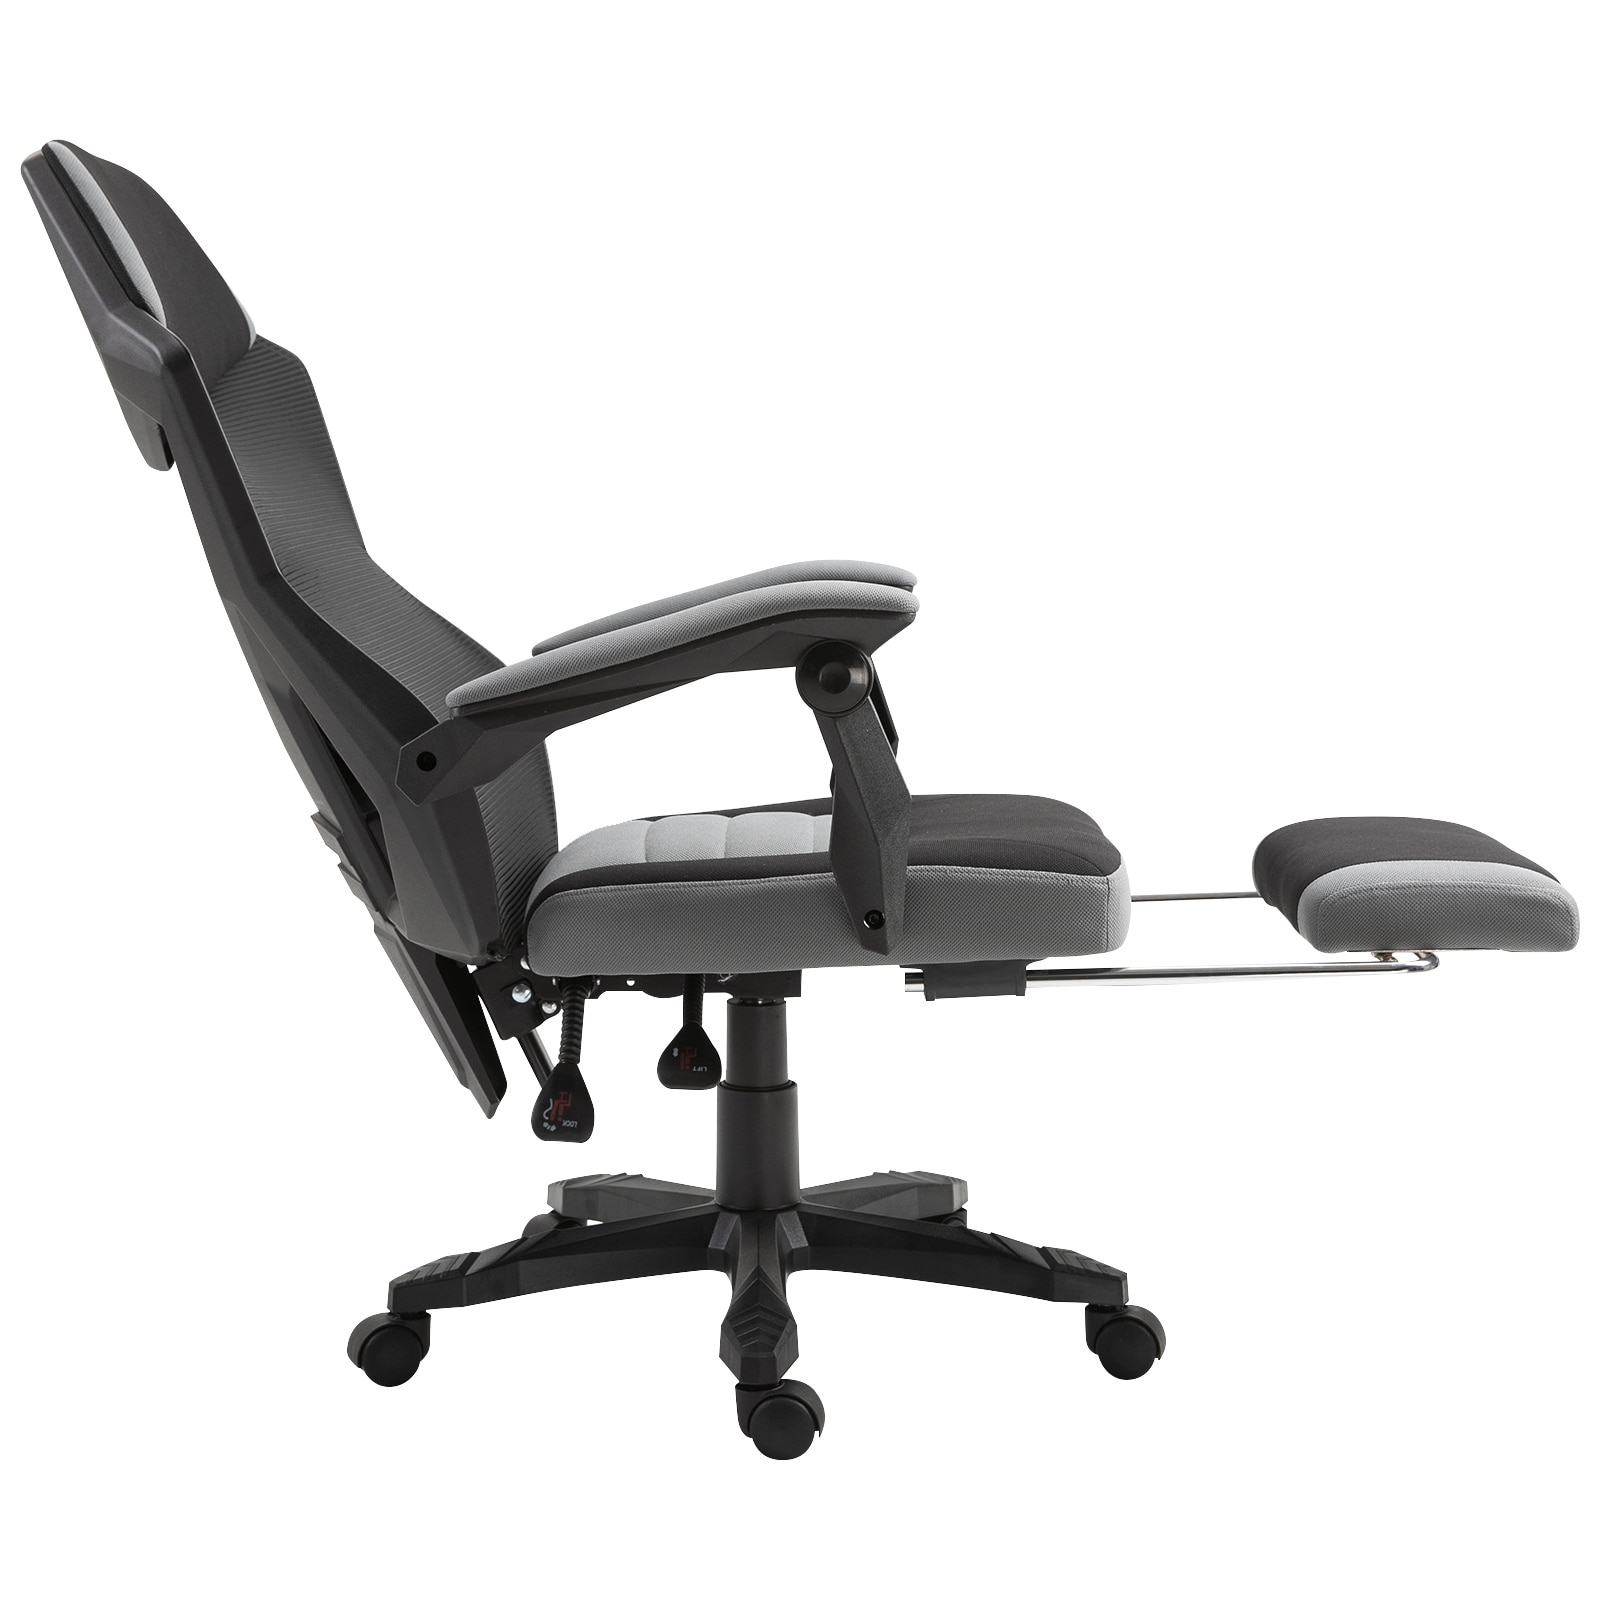 Details about   Office Mesh Chair Task Seat High Back Computer Adjustable Recliner Footrest New 